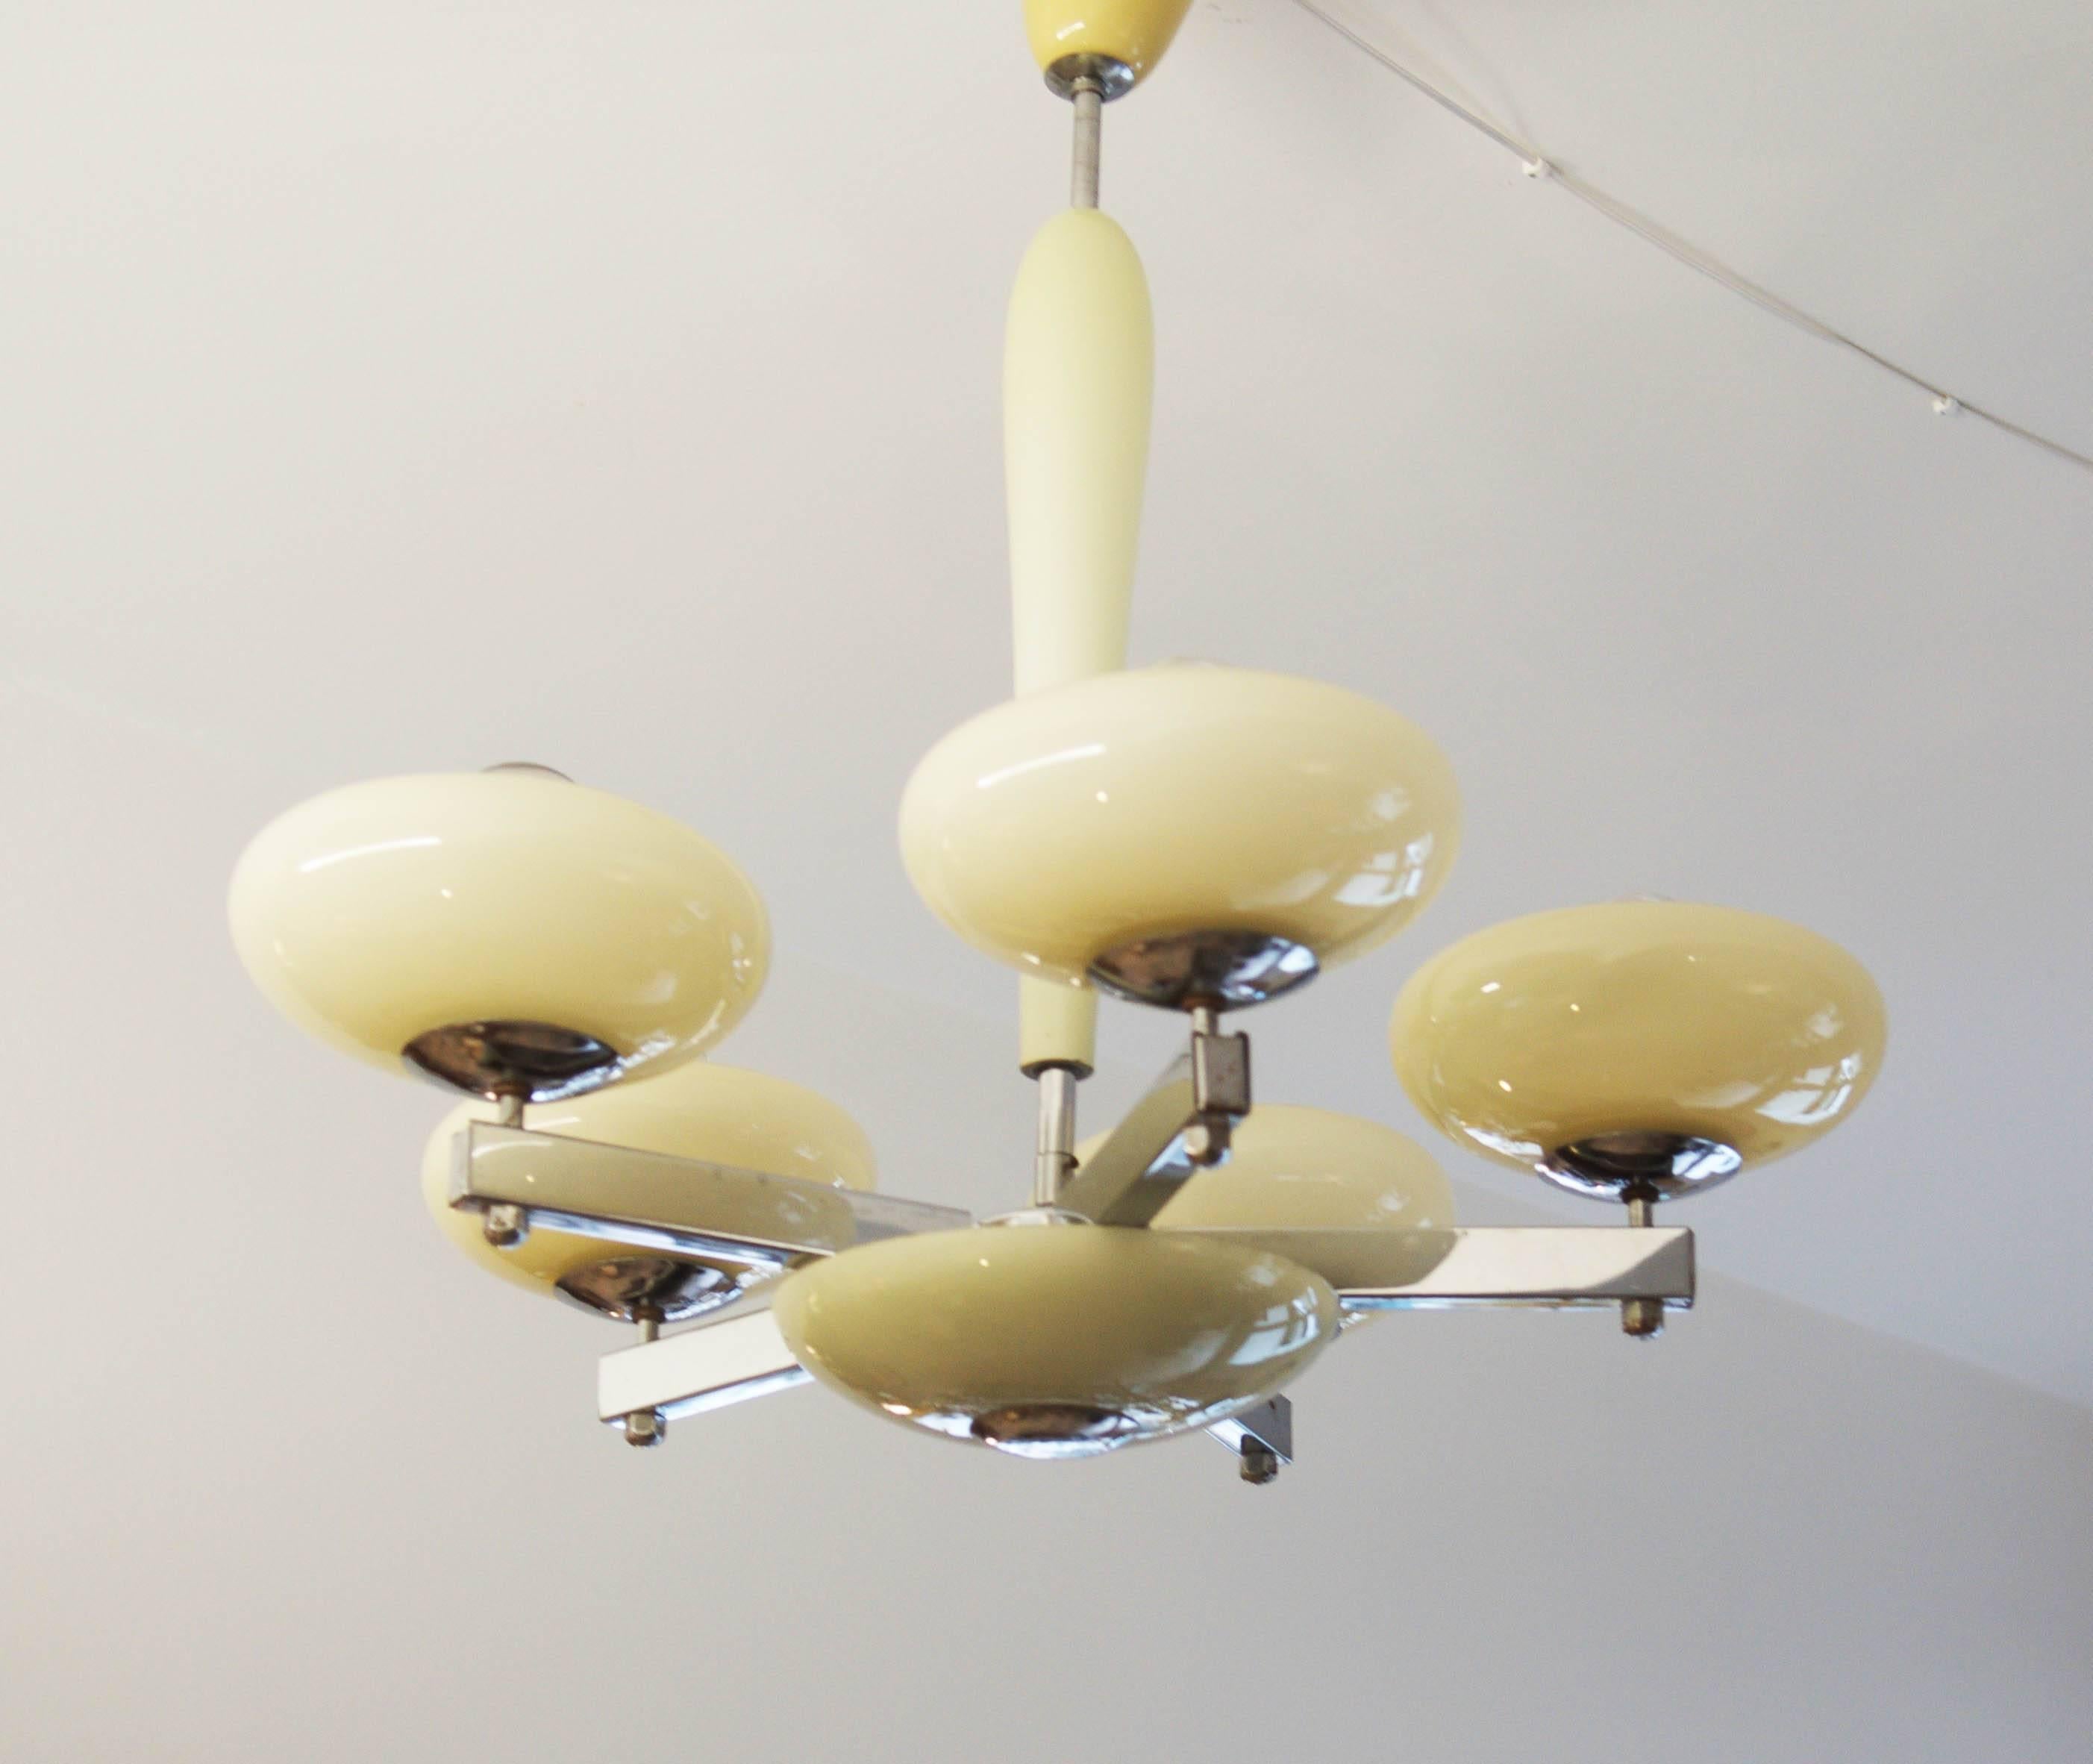 Chandelier form the 1930s.
Brass construction chromed with five E27 sockets.